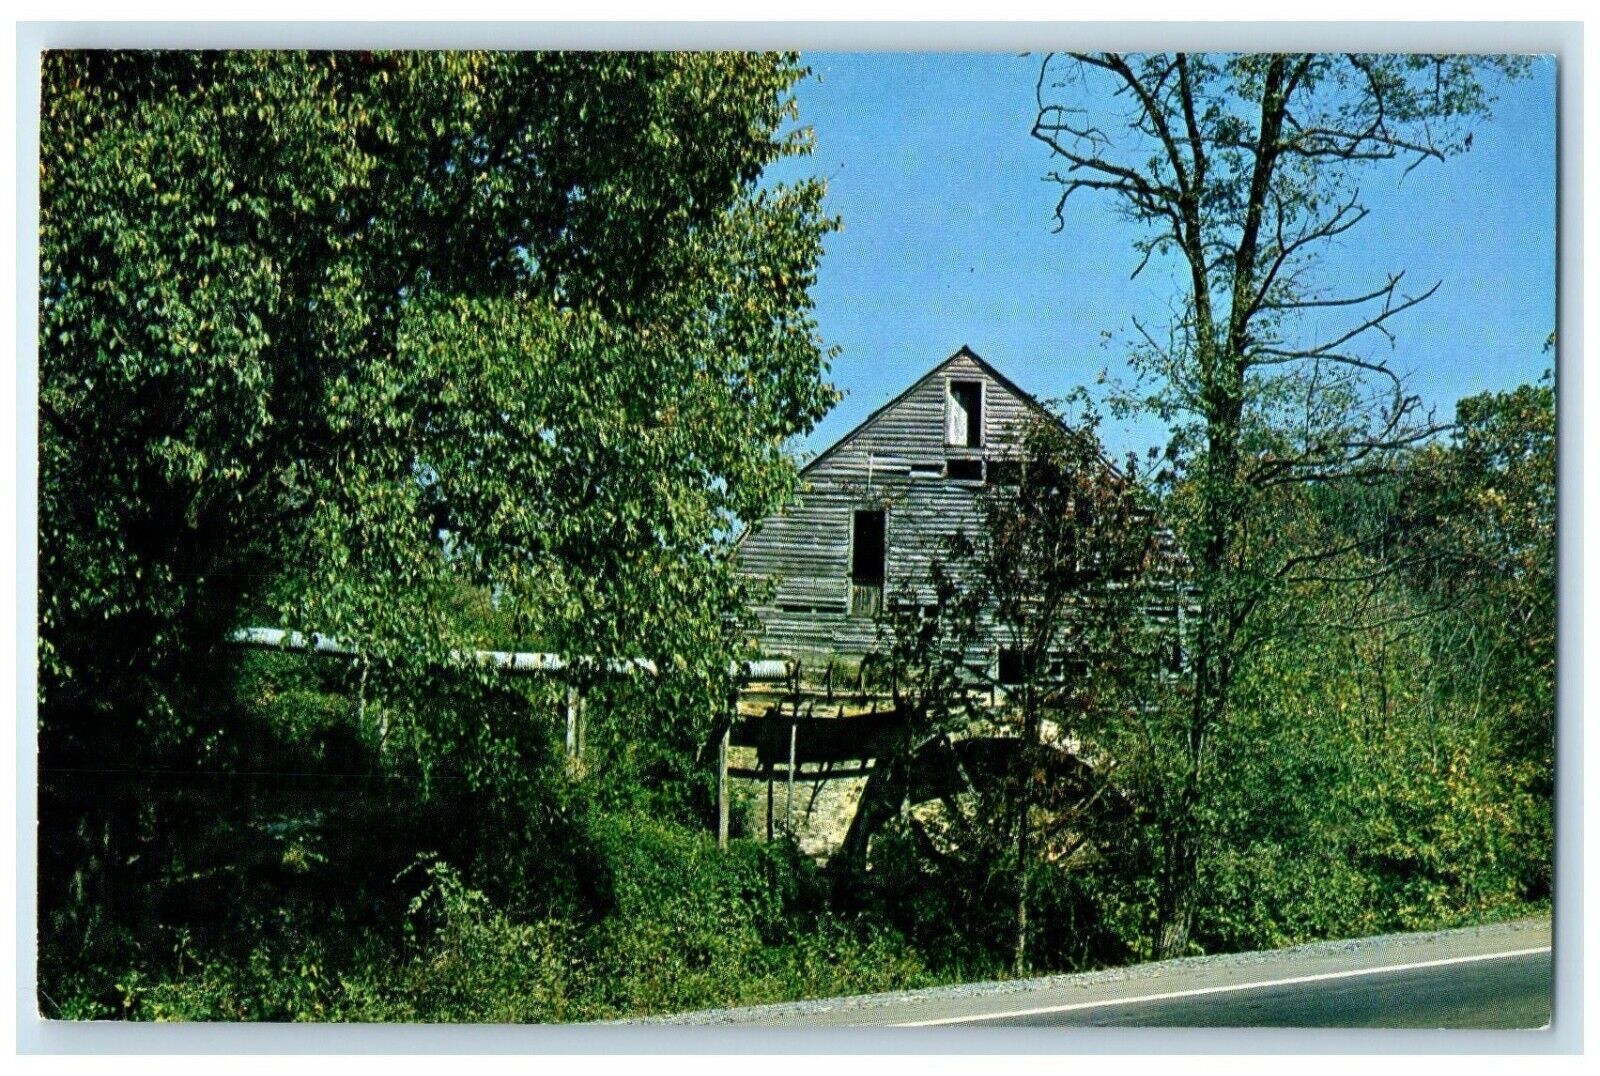 c1960 Rice's Mill Picturesque Old Gris Mill Henry Kingsport Tennessee Postcard